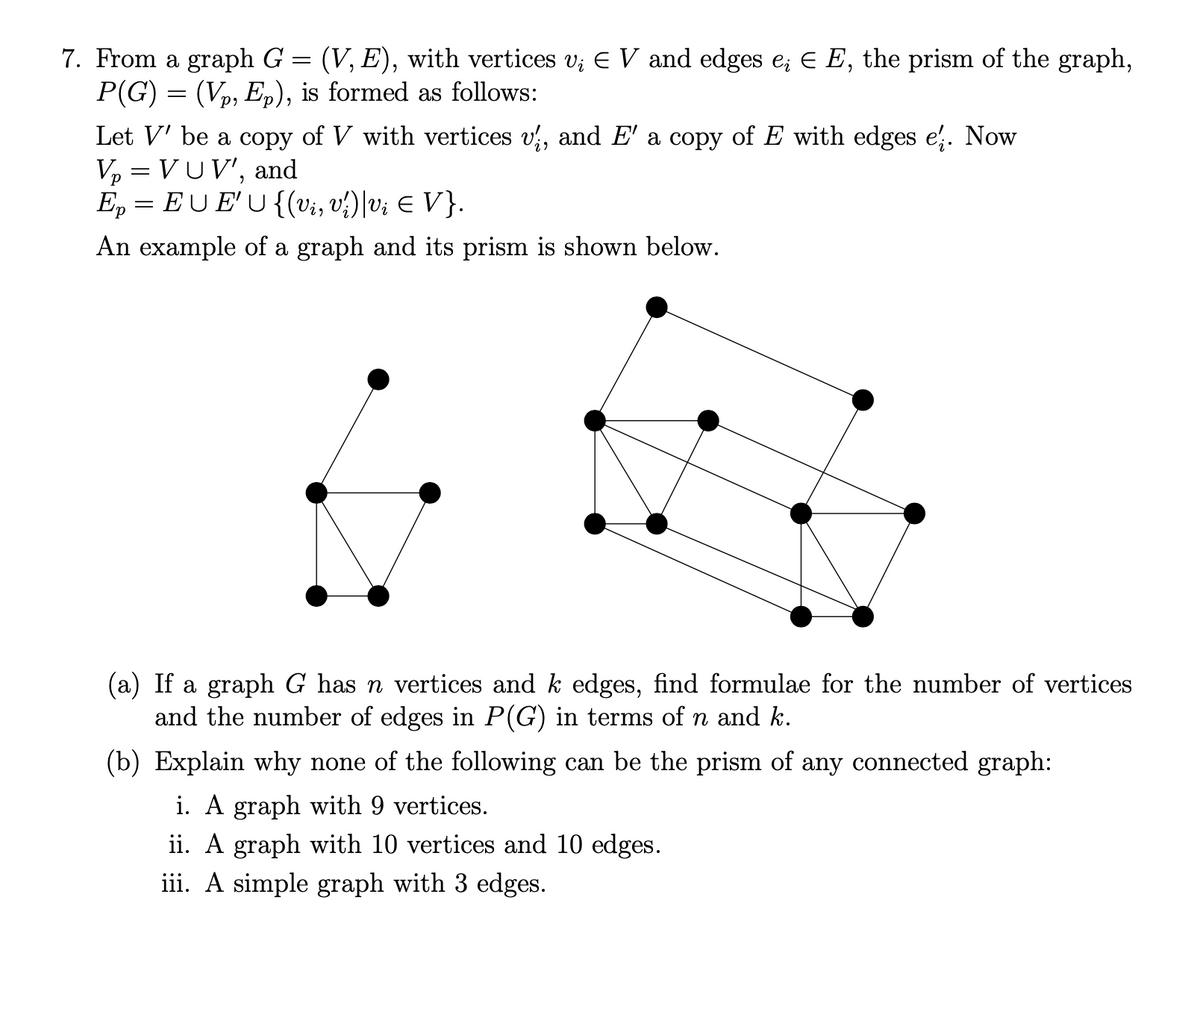 7. From a graph G = (V, E), with vertices v; E V and edges e; E E, the prism of the graph,
P(G) = (Vp, Ep), is formed as follows:
Let V' be a copy of V with vertices v, and E' a copy of E with edges e. Now
Vp = VUV', and
E, = EU E'U {(vi, v?)|v¿ E V}.
An example of a graph and its prism is shown below.
(a) If a graph G has n vertices and k edges, find formulae for the number of vertices
and the number of edges in P(G) in terms of n and k.
(b) Explain why none of the following can be the prism of any connected graph:
i. A graph with 9 vertices.
ii. A graph with 10 vertices and 10 edges.
iii. A simple graph with 3 edges.
